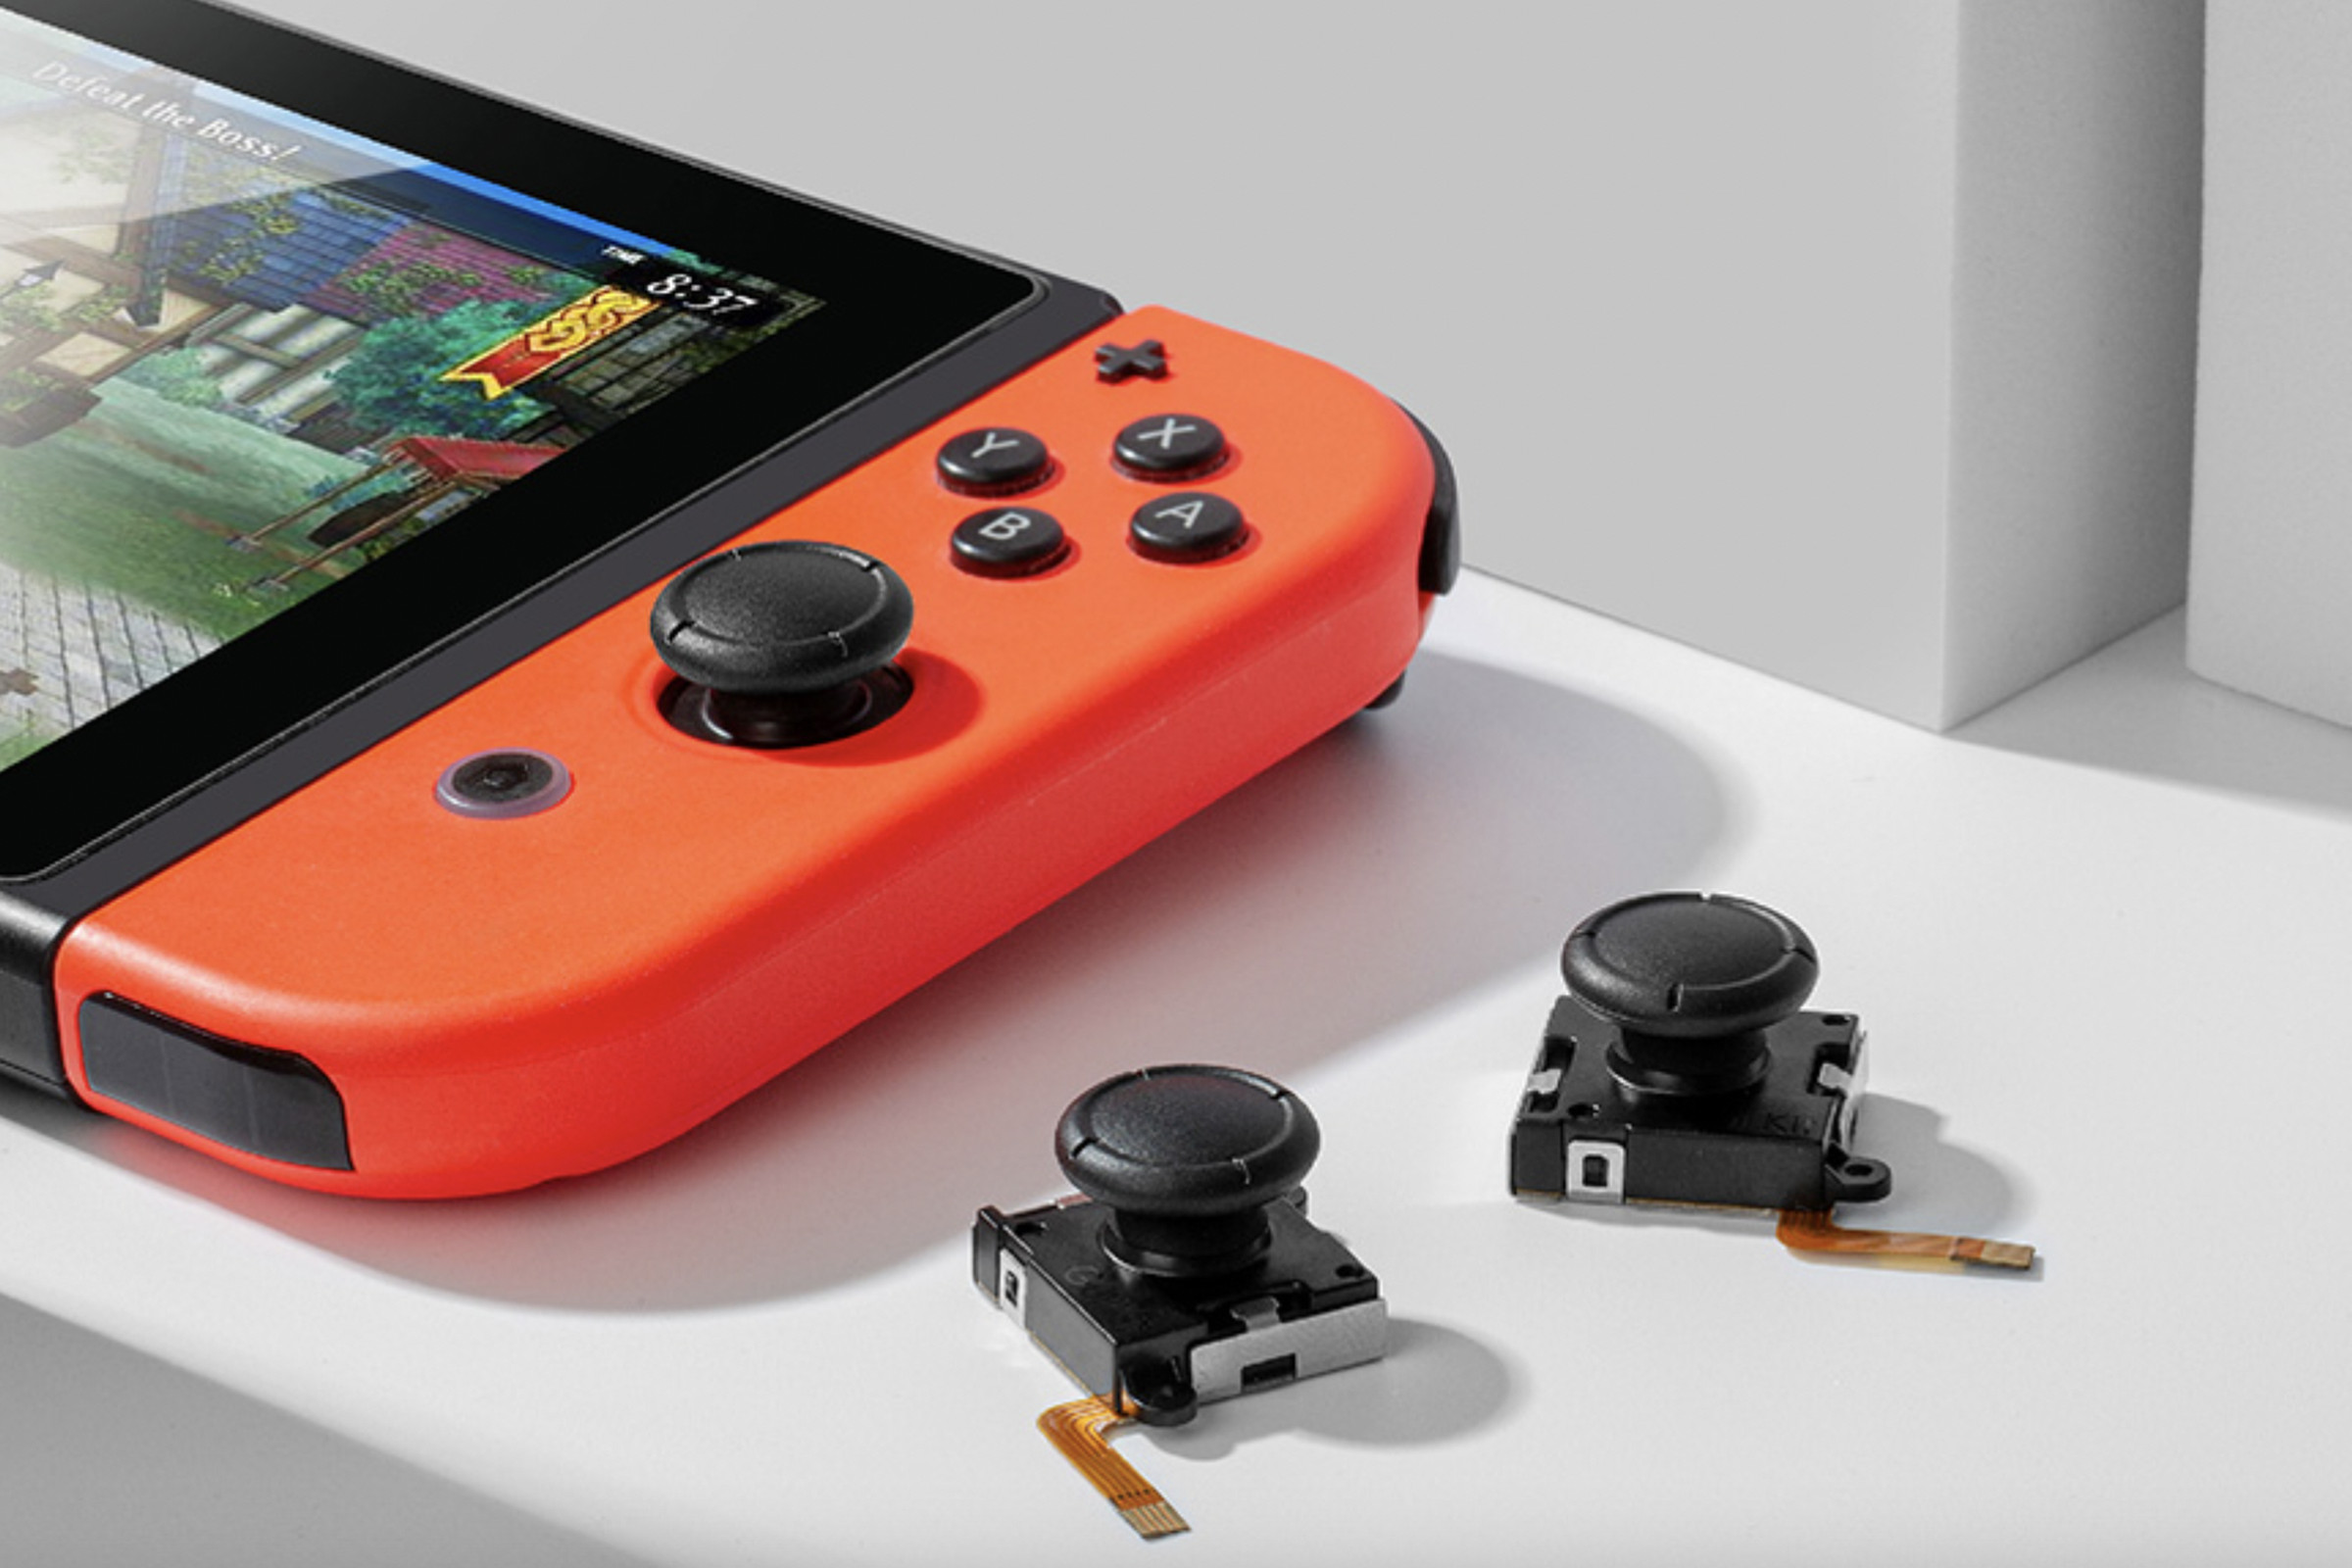 Finally, a solution to the Switch’s Joy-Con drift